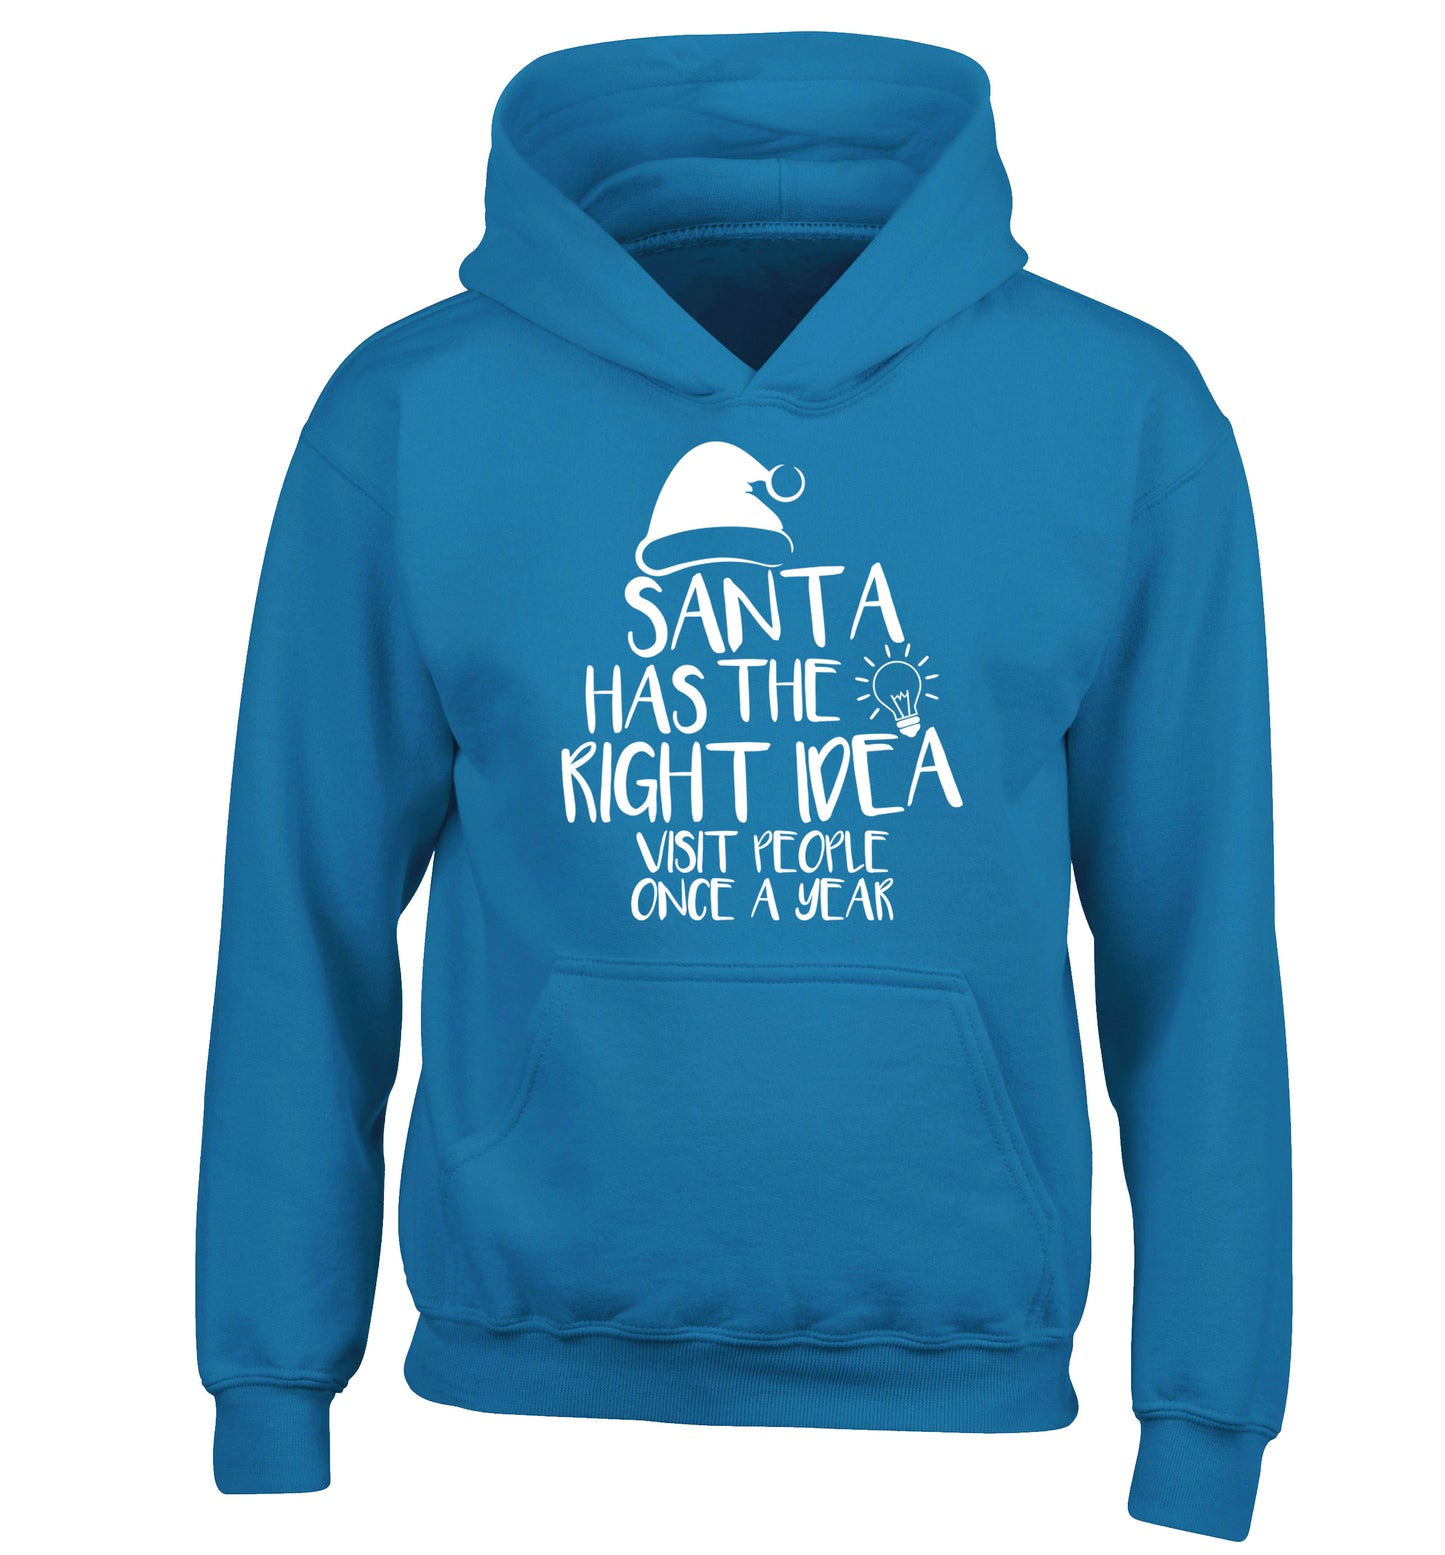 Santa has the right idea visit people once a year children's blue hoodie 12-14 Years